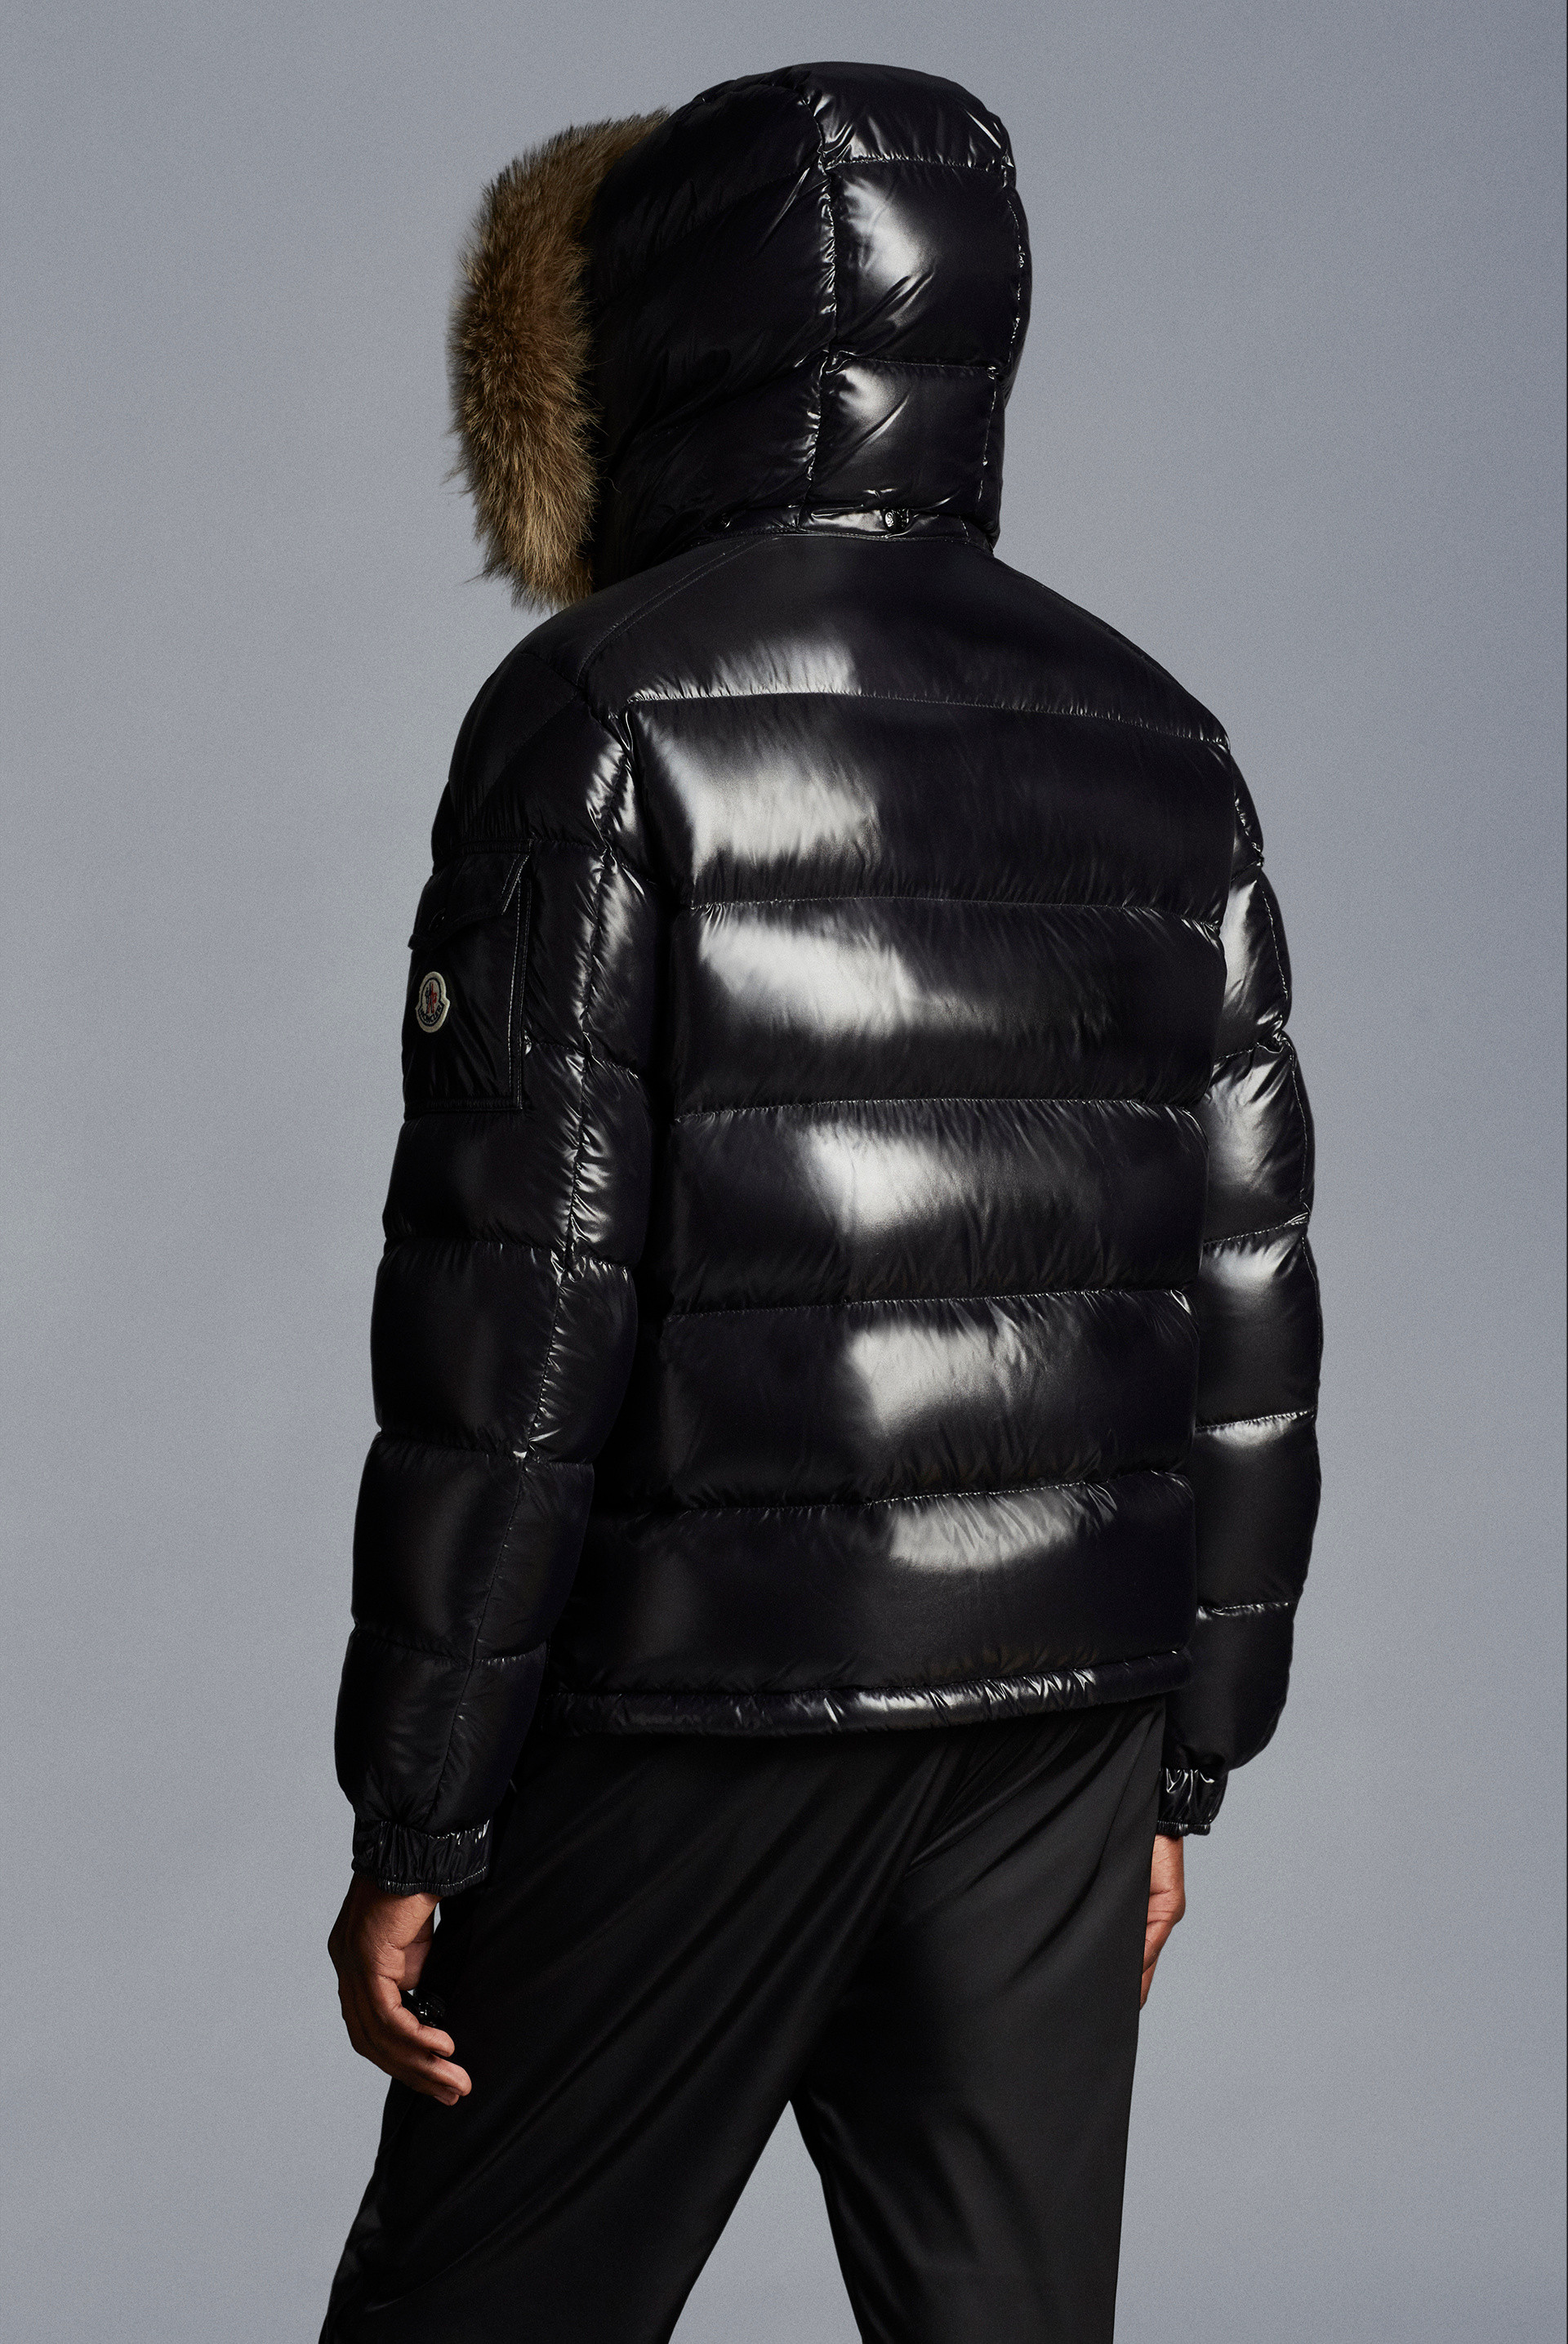 moncler maya look alike,Save up to 15%,www.ilcascinone.com